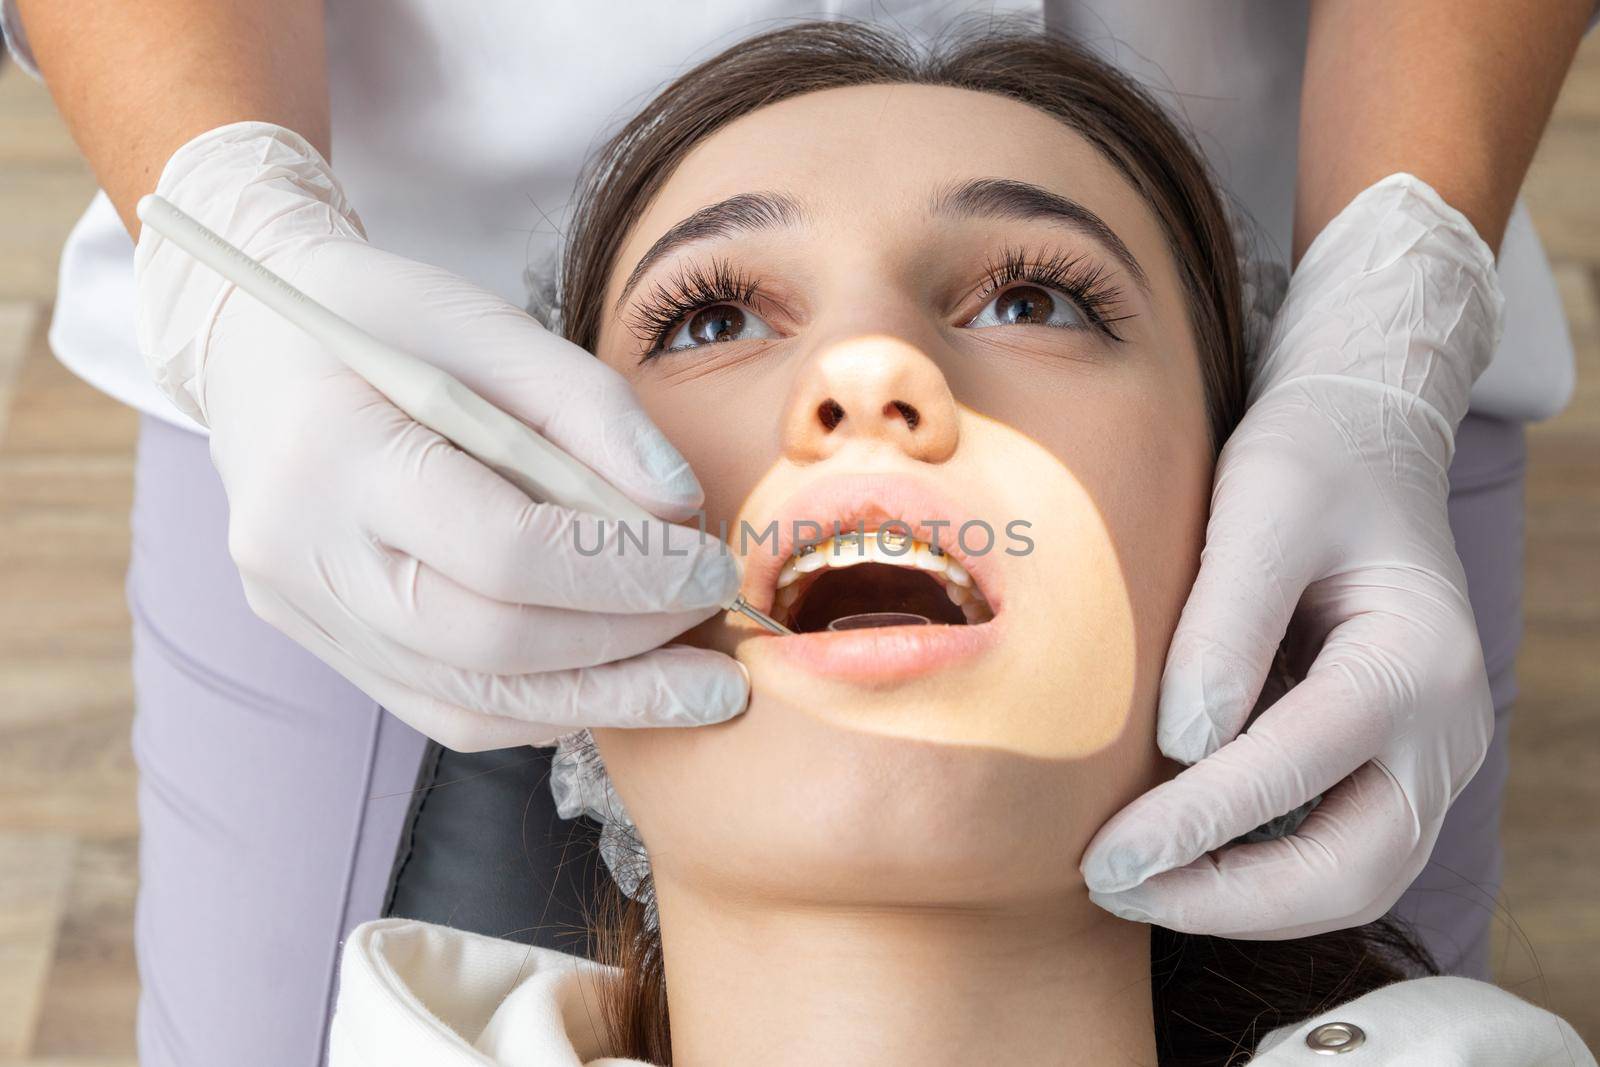 Dentist examining patient teeth with mirror in dentist clinic by Mariakray